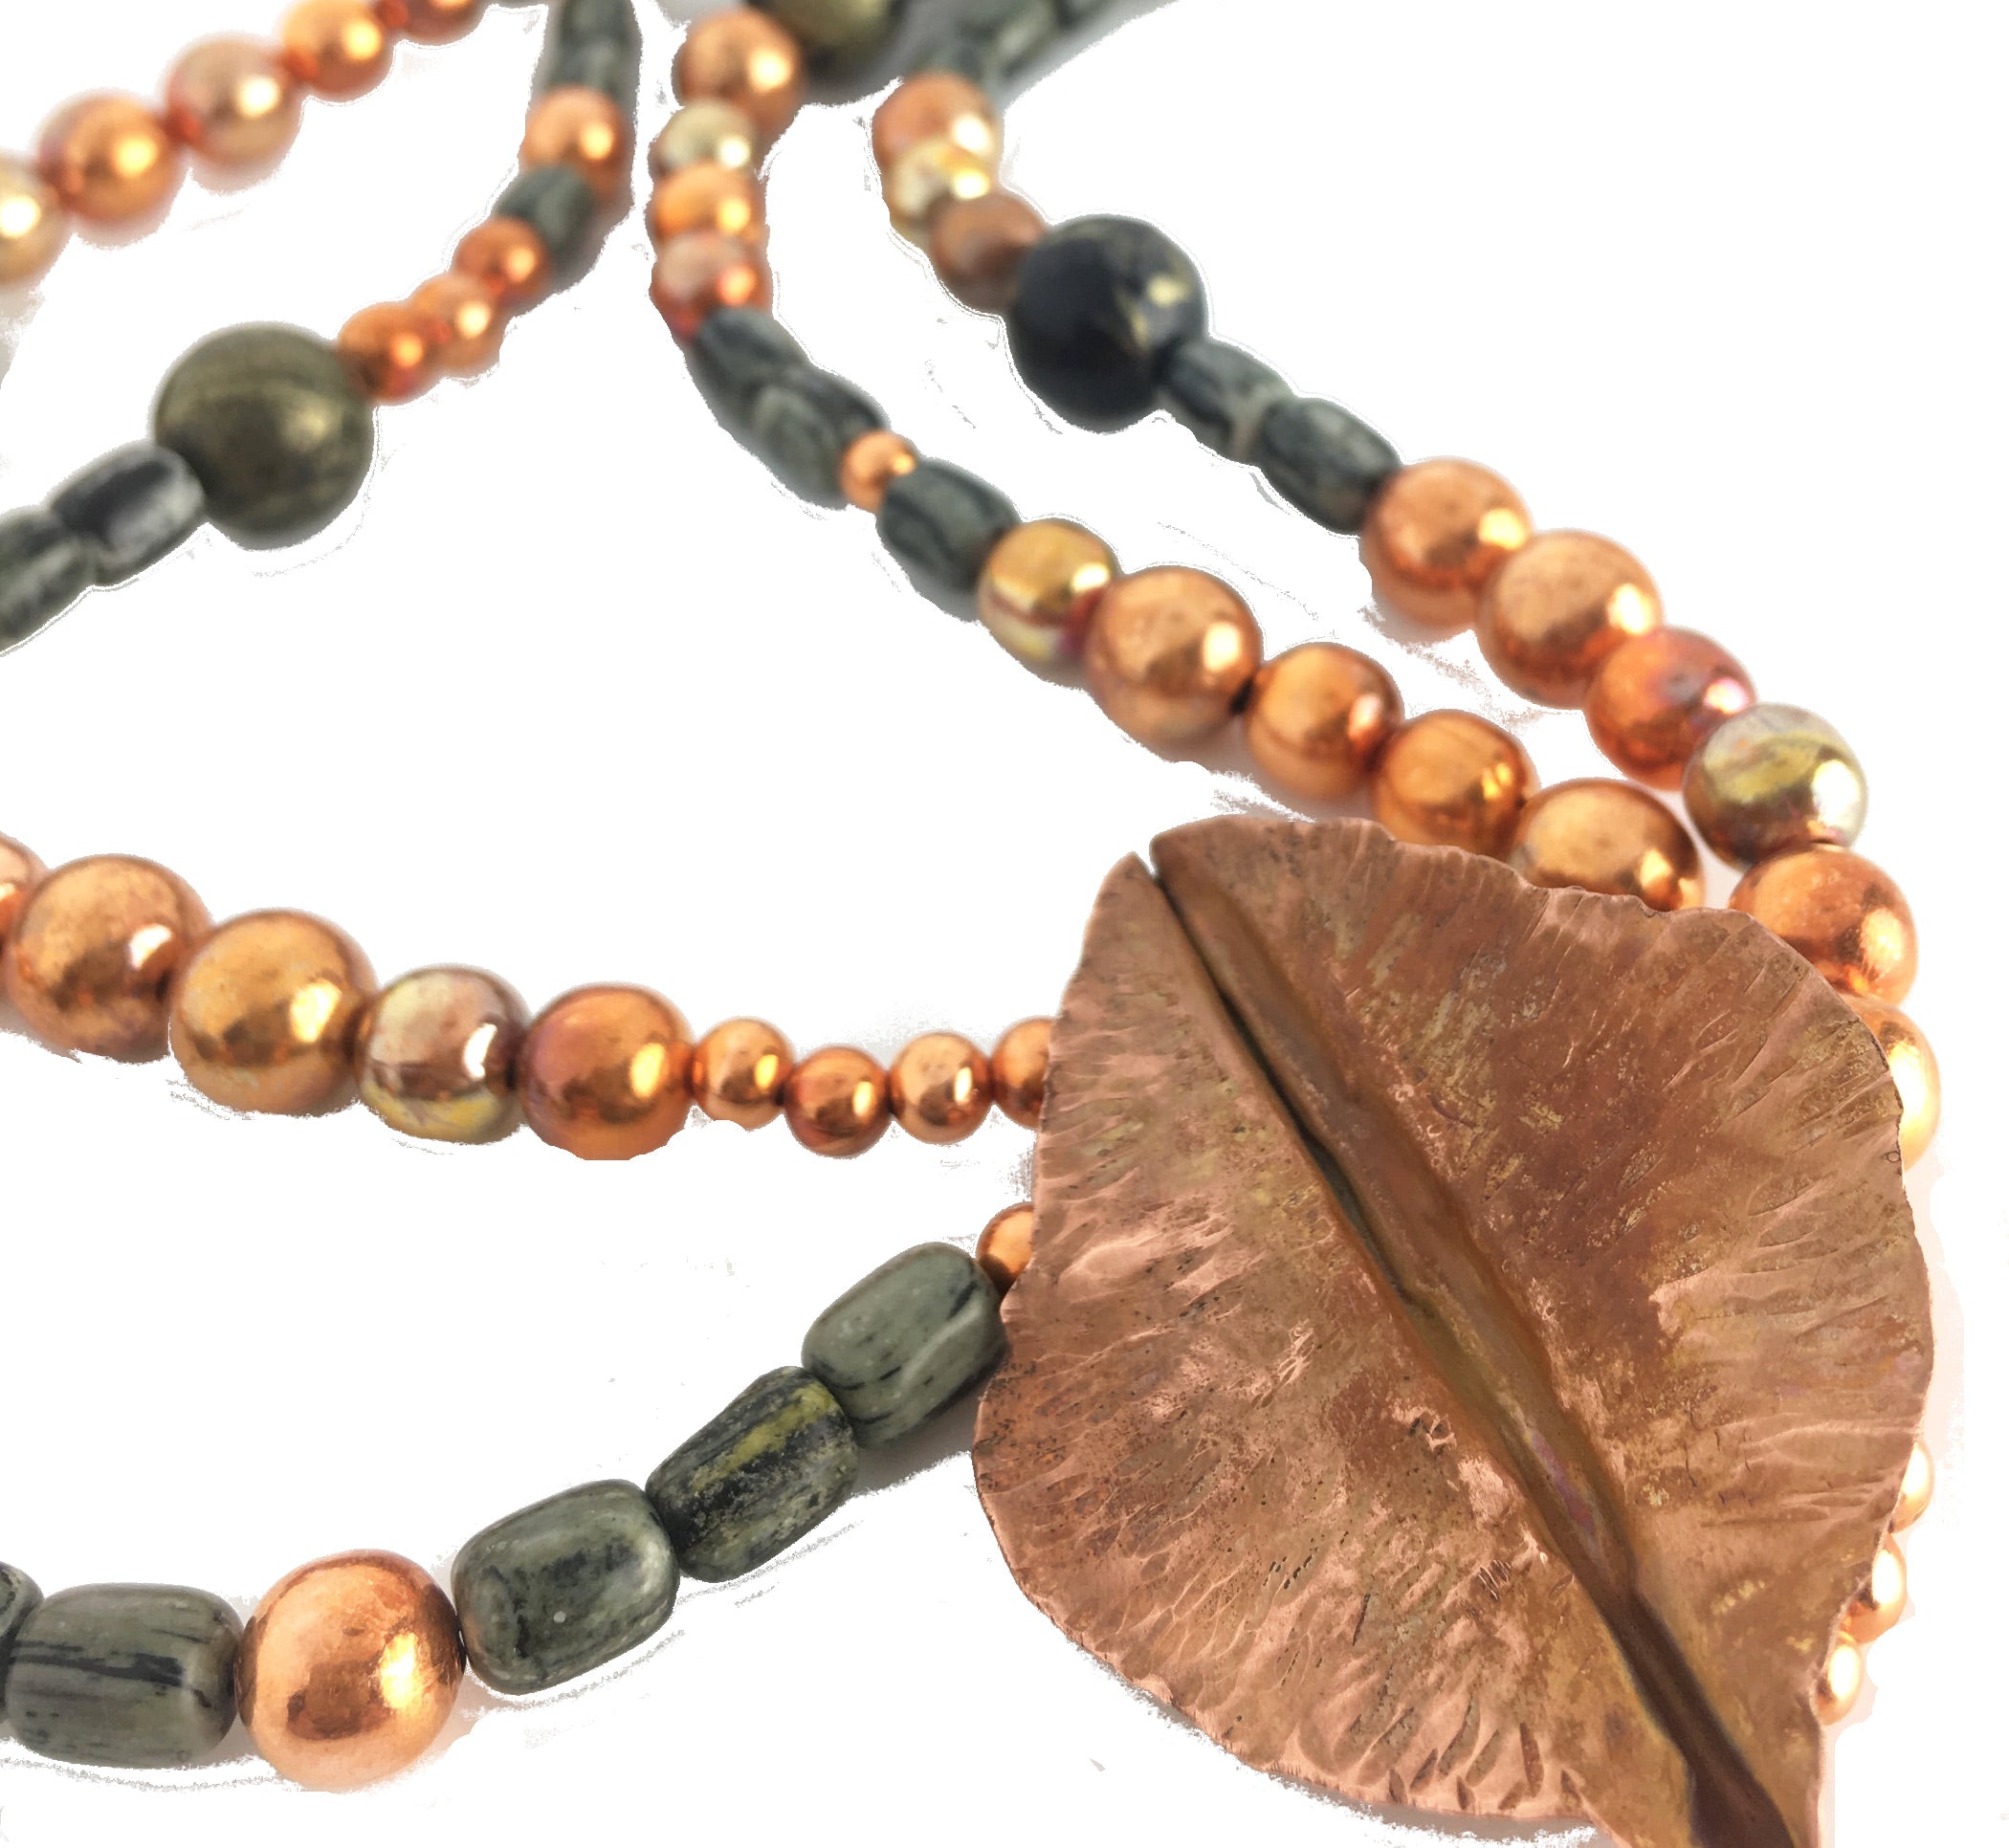 Double Strand Arizona Gemstone Sonoran Sunset Necklace with Hand Forged Copper Leaf